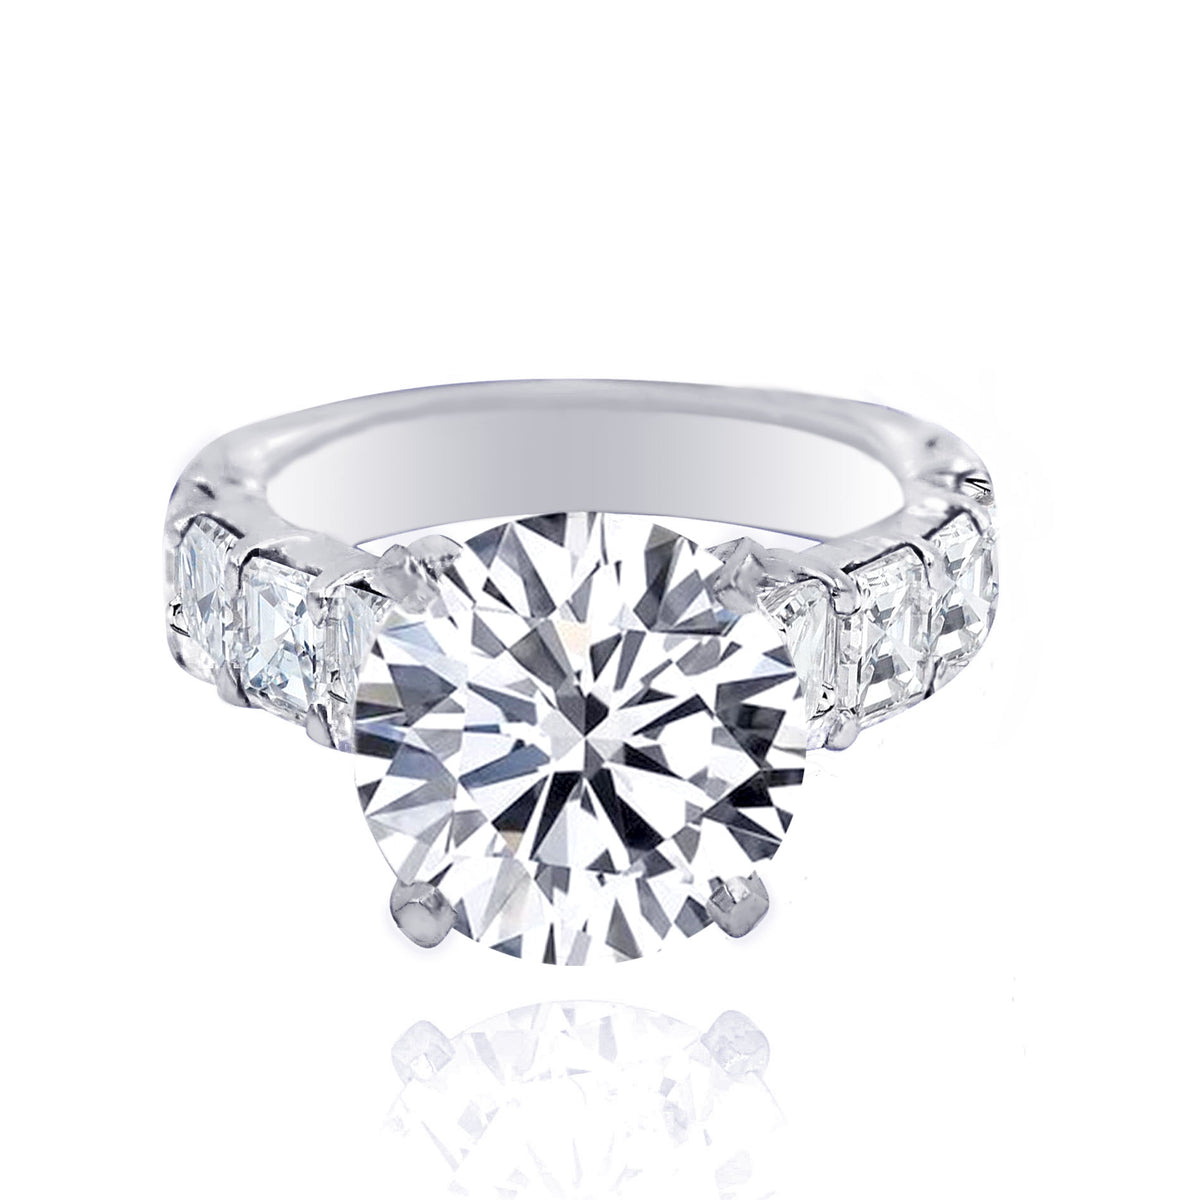 JB Star Platinum Diamond Ring with Round Brilliant Cut Center and Assher Eternity Band